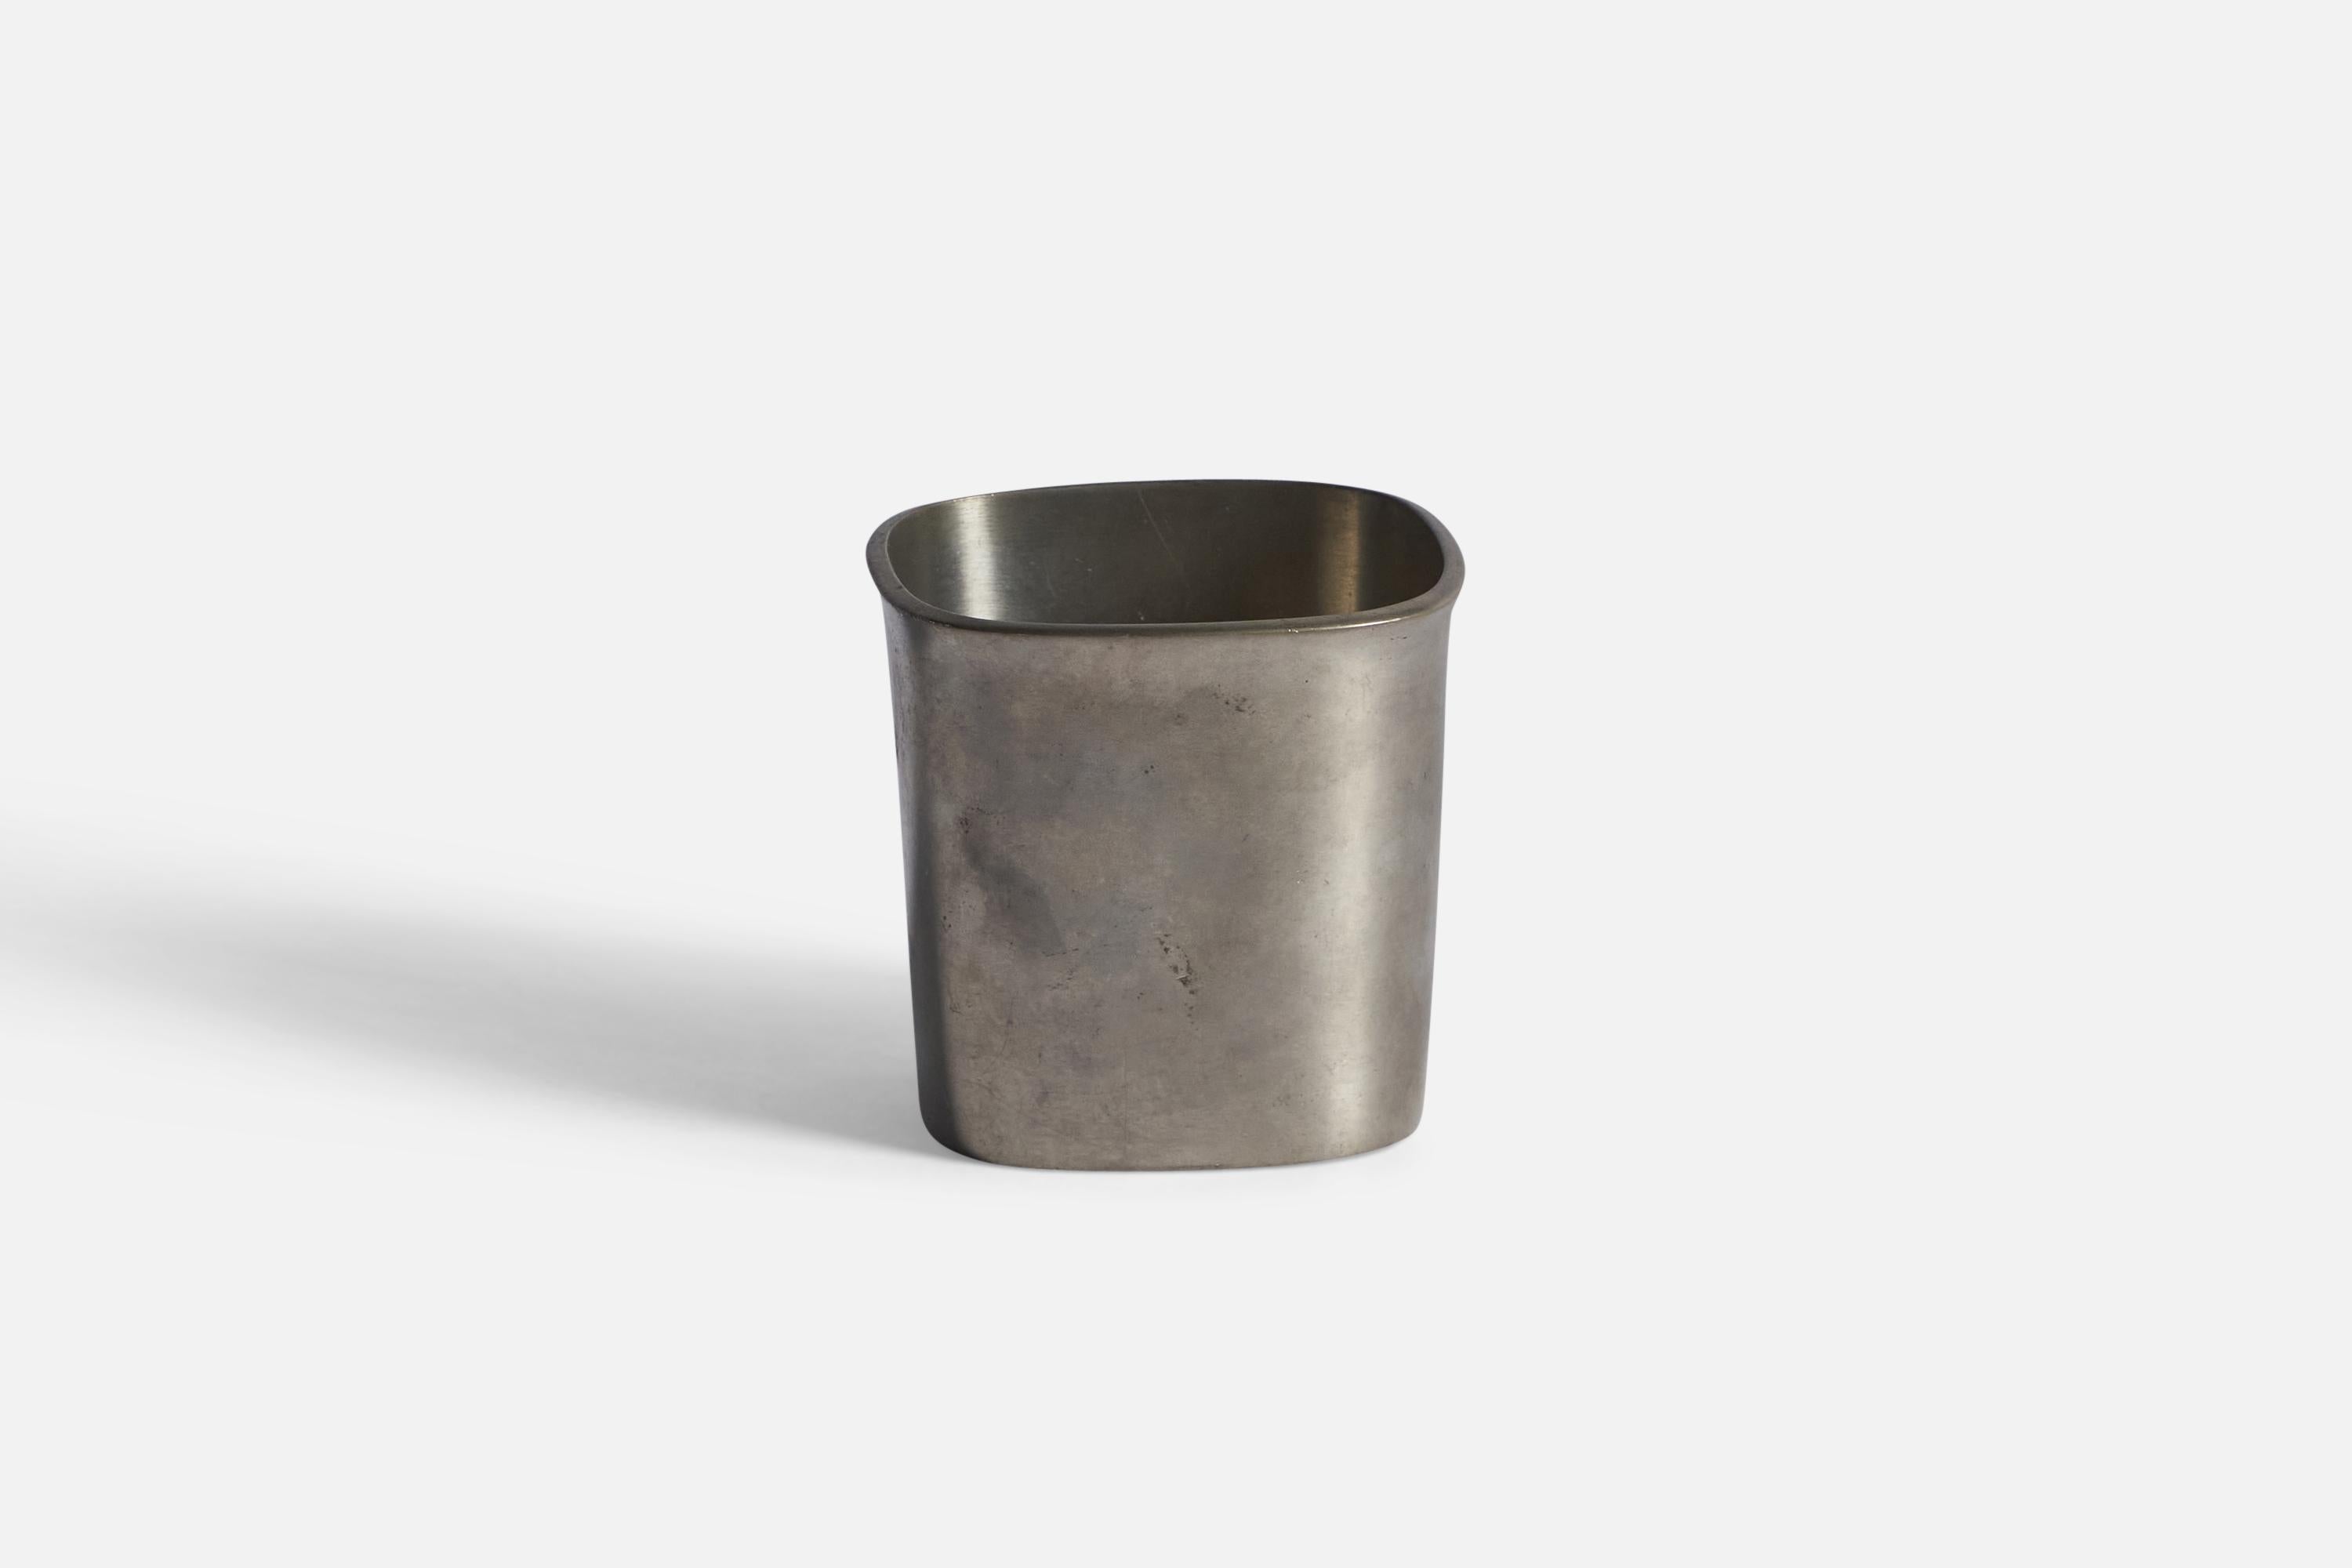 A small pewter vase designed and produced by Just Andersen, Denmark, c. 1930s.